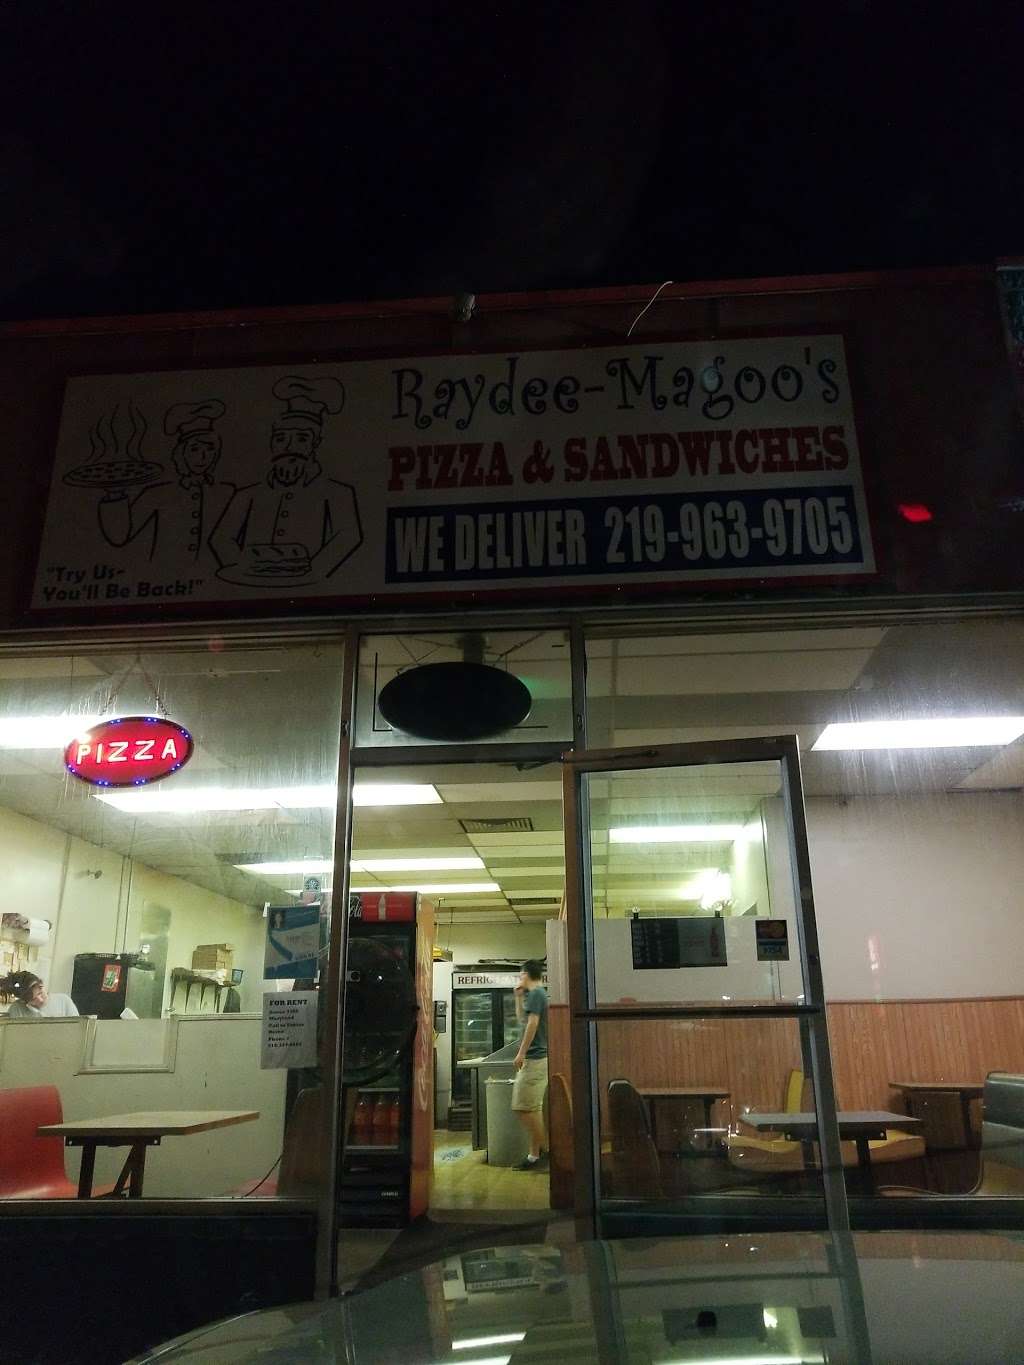 Raydee Magoos | 408 W 37th Ave, Hobart, IN 46342 | Phone: (219) 963-9705